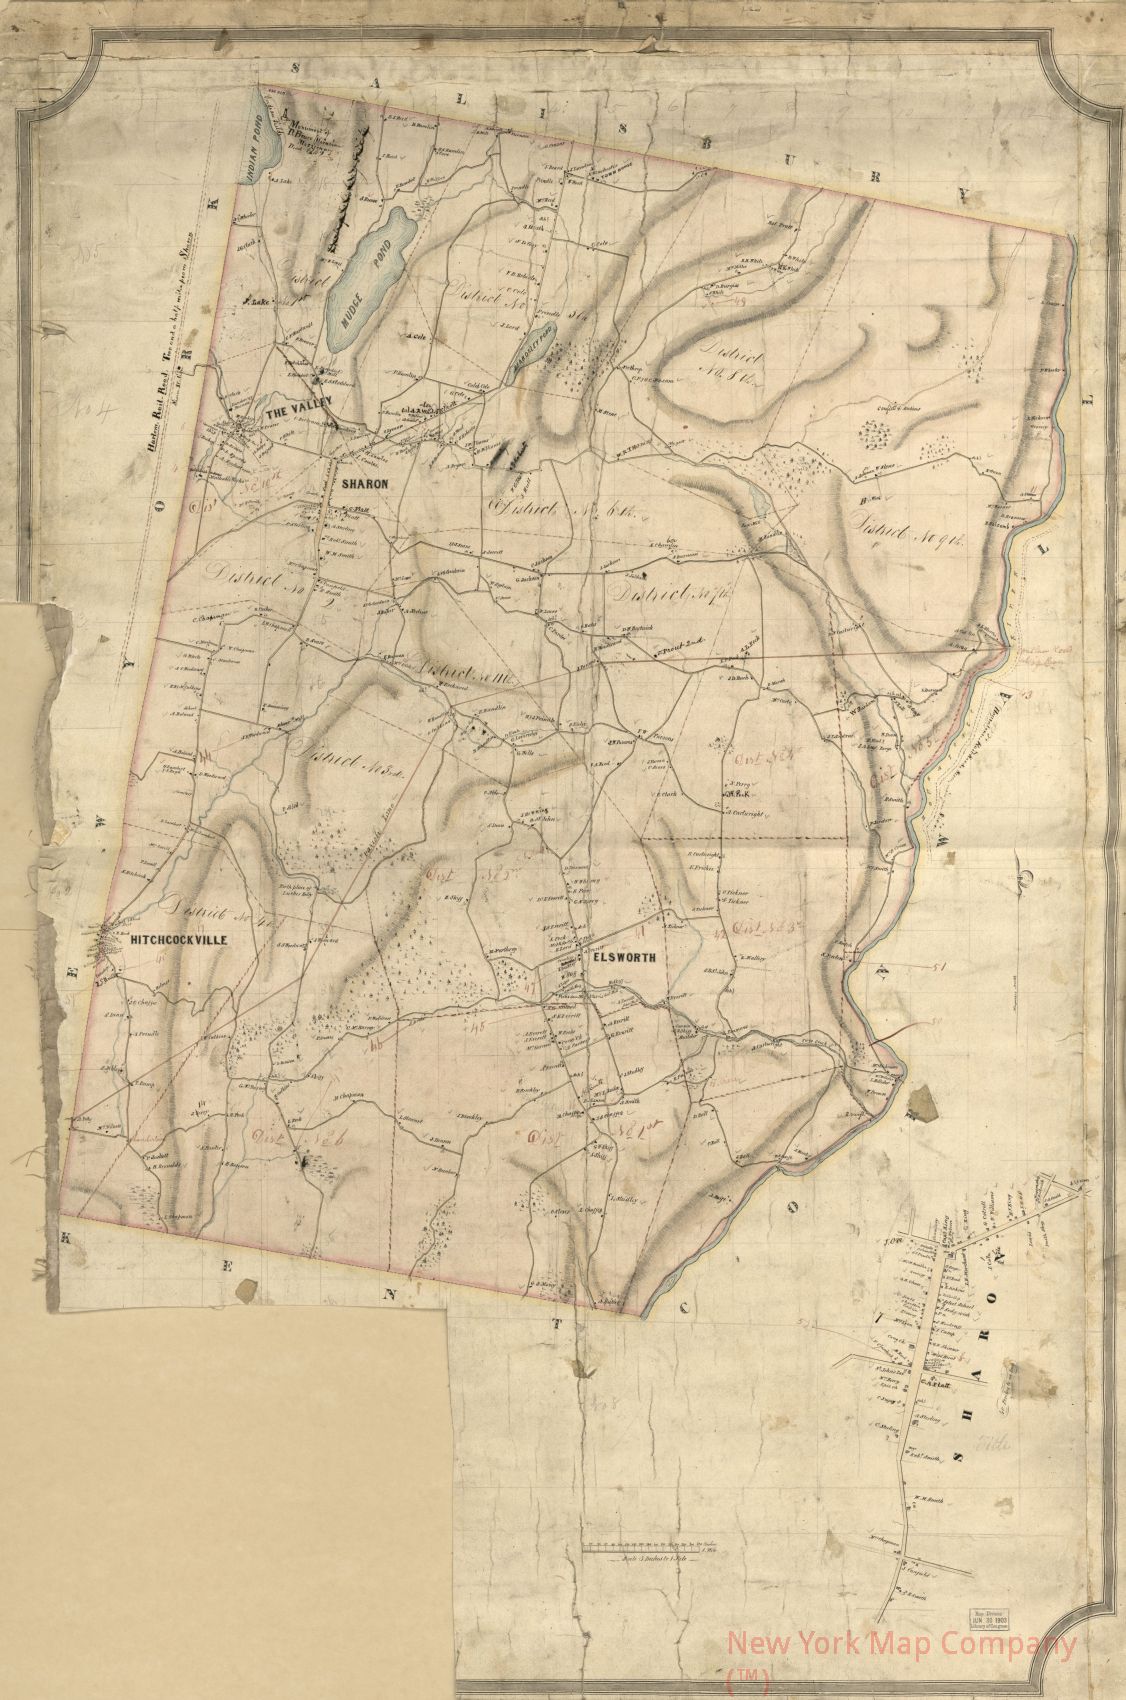 1852 map Map of the town of Sharon, Litchfield County, Conn.. Map Subjects: Connecticut | Landowners | Manuscript Maps | Real Property | Sharon | Sharon Conn: Town | Sharon Conn | Sharon Town |